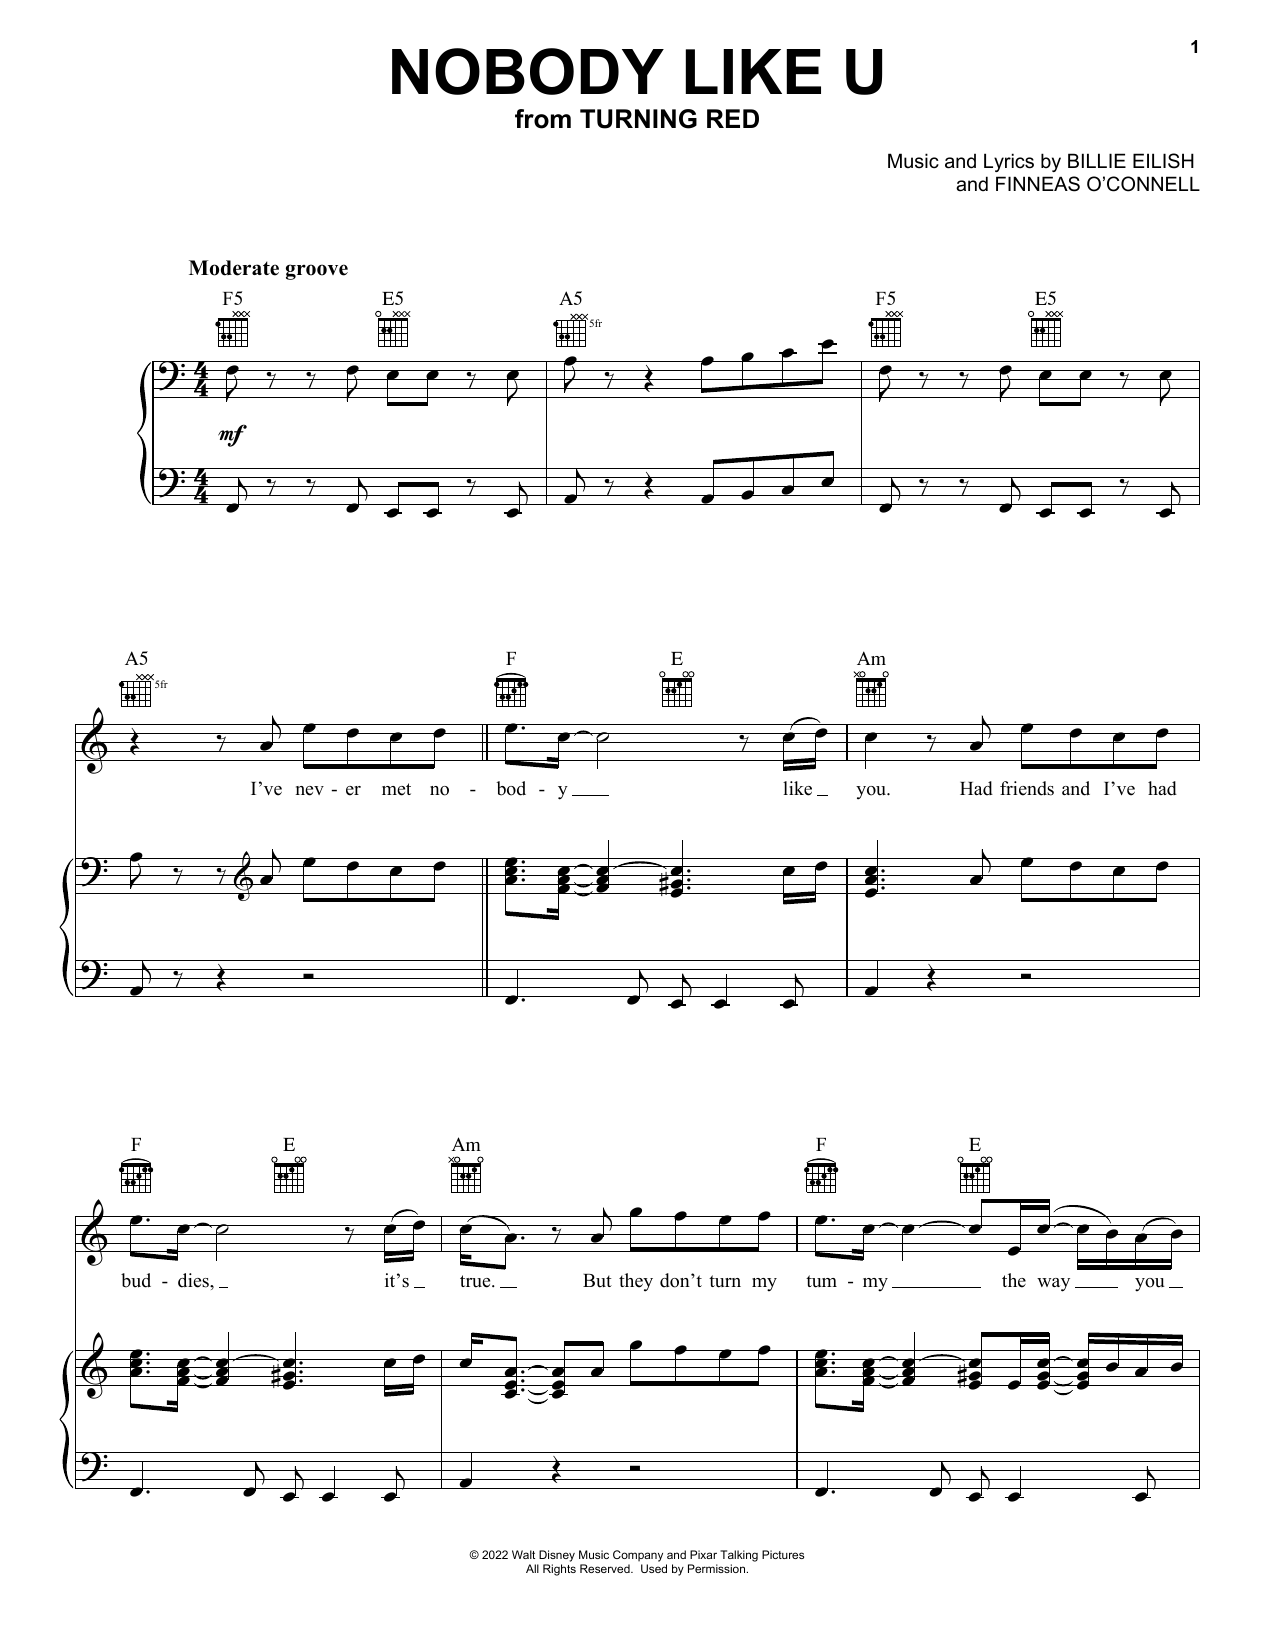 4*TOWN Nobody Like U (from Turning Red) sheet music notes and chords. Download Printable PDF.